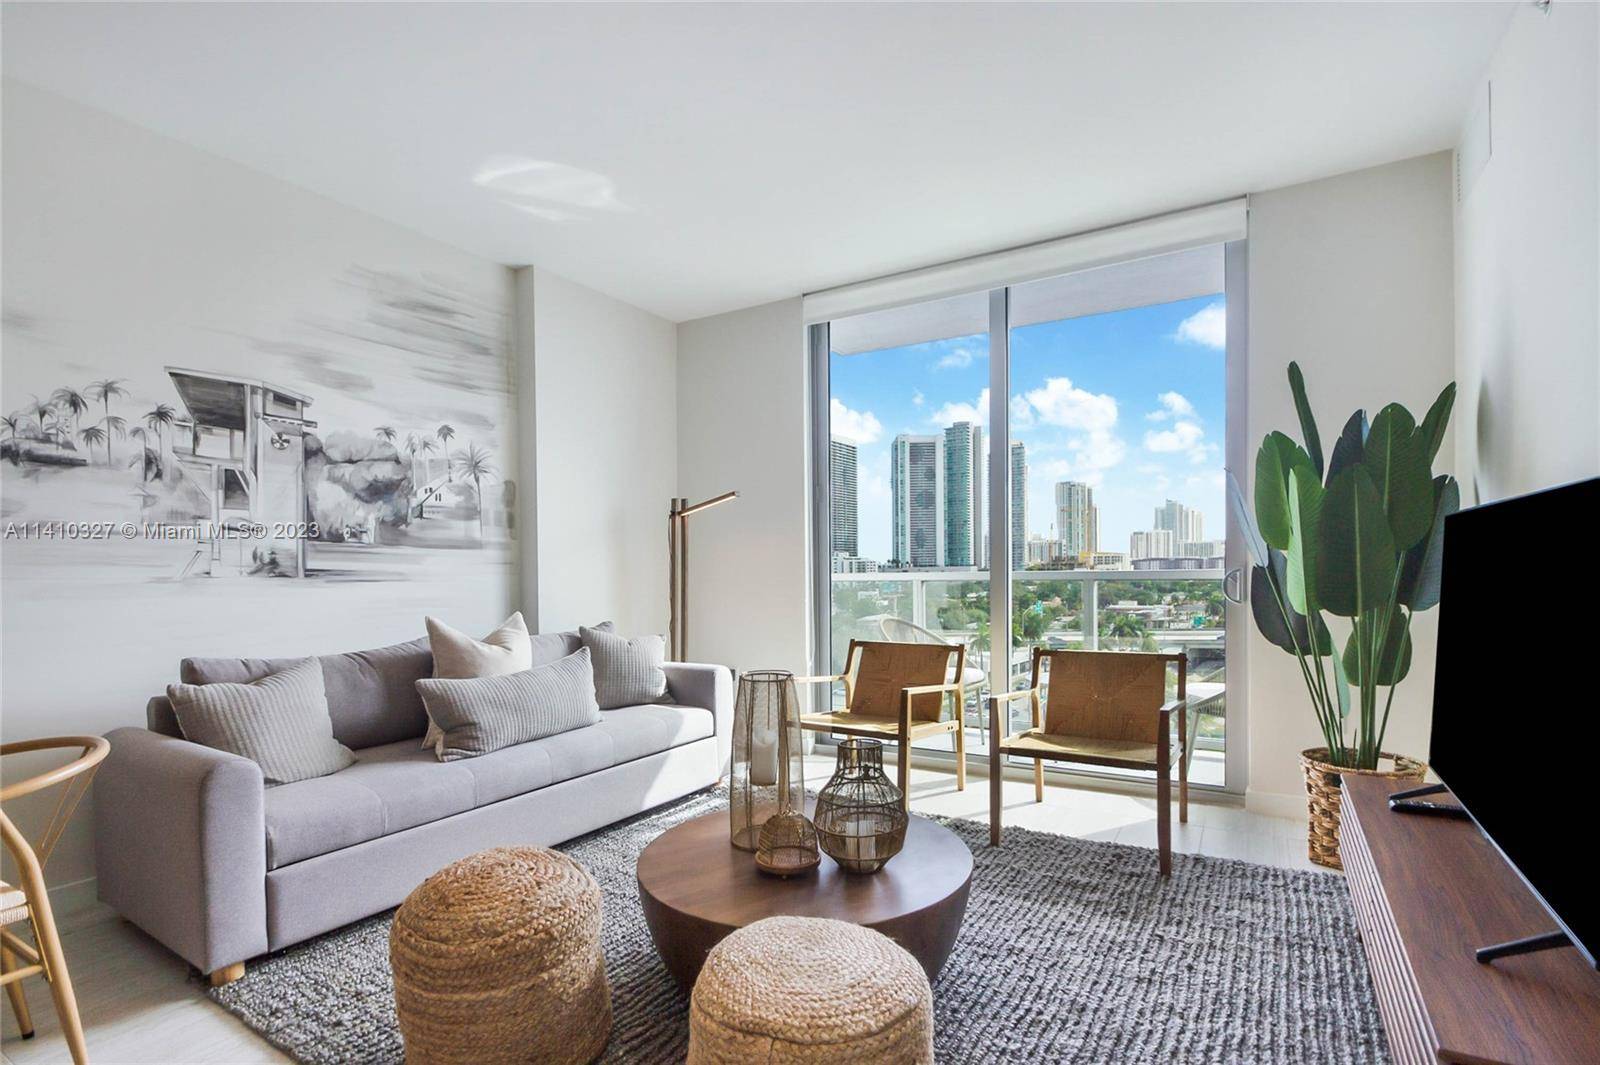 AMAZING OPPORTUNITY BEAUTIFUL 1 BED CONDO IN ONE OF THE NEWEST CONDO BUILDINGS IN THE MIAMI DESIGN DISTRICT, ONLY 15 MIN AWAY FROM AIRPORT AND BEACH.